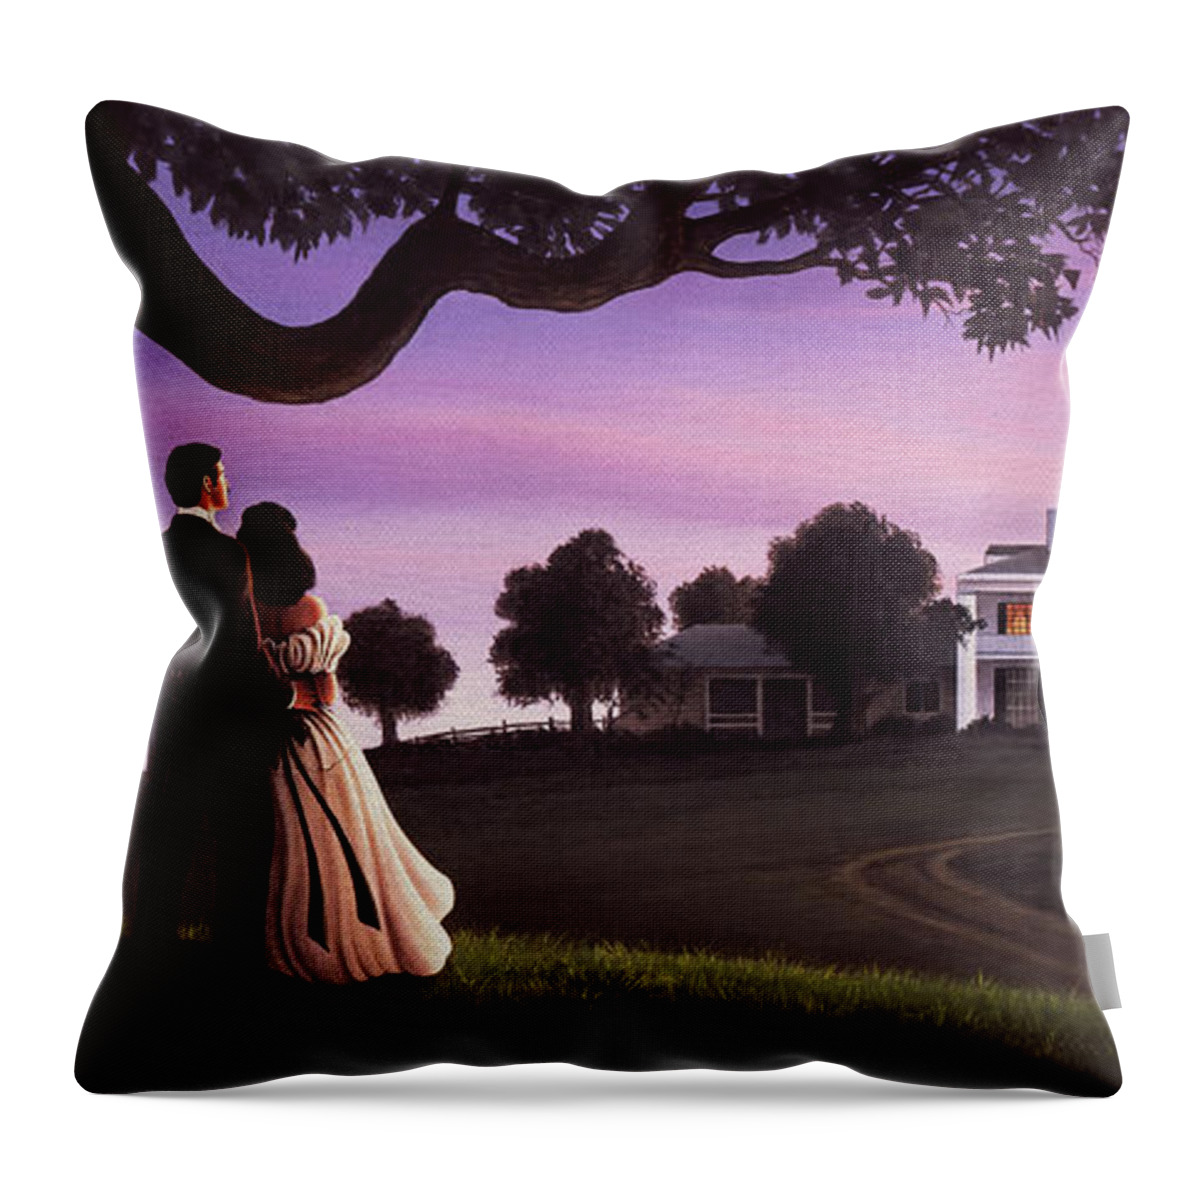 Gone With The Wind Throw Pillow featuring the painting Gone With The Wind by Jerry LoFaro